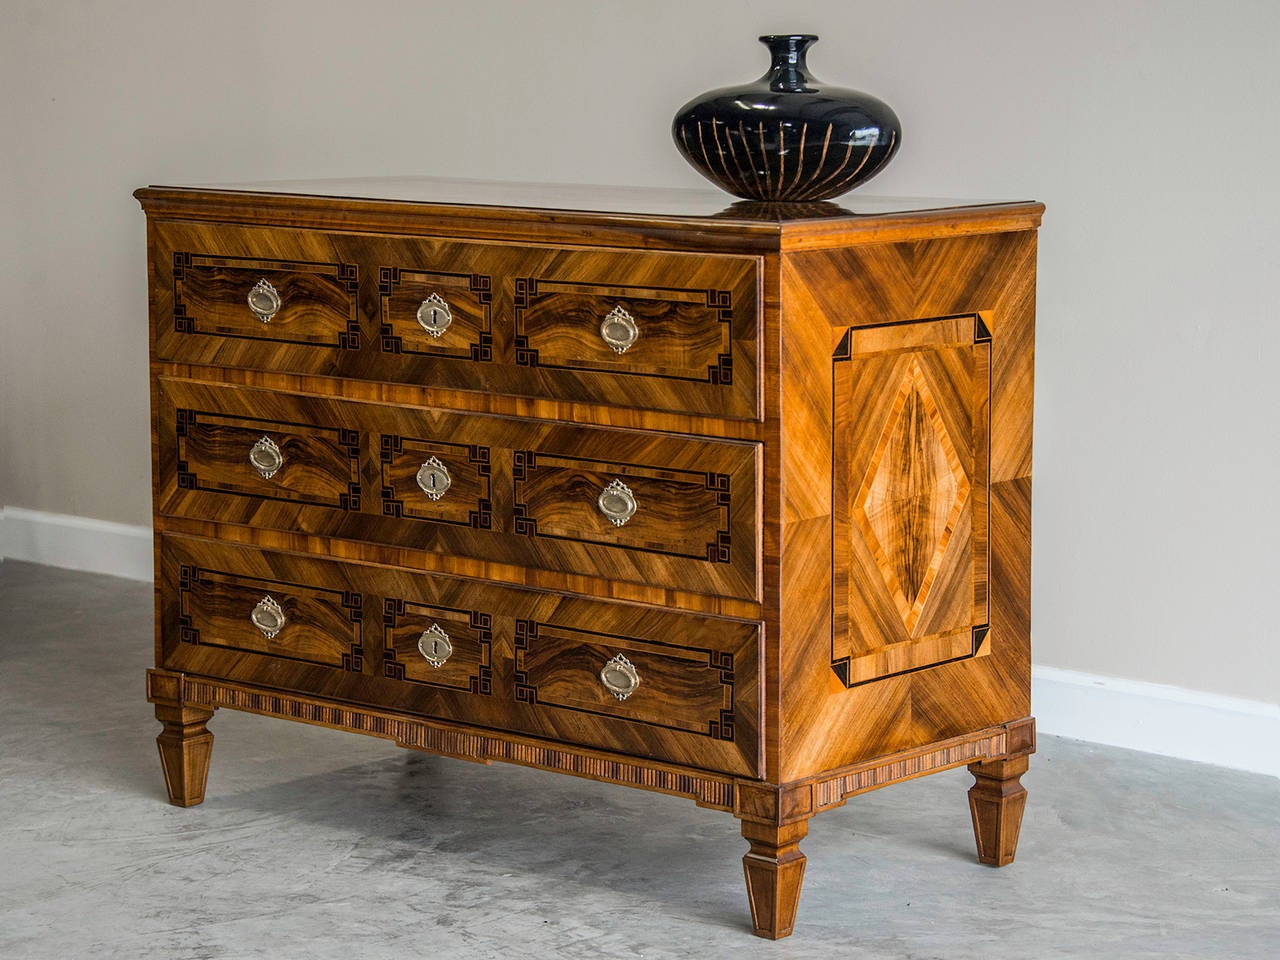 Late 18th Century Louis XVI Period Inlaid Walnut Chest of Drawers, South Germany circa 1785